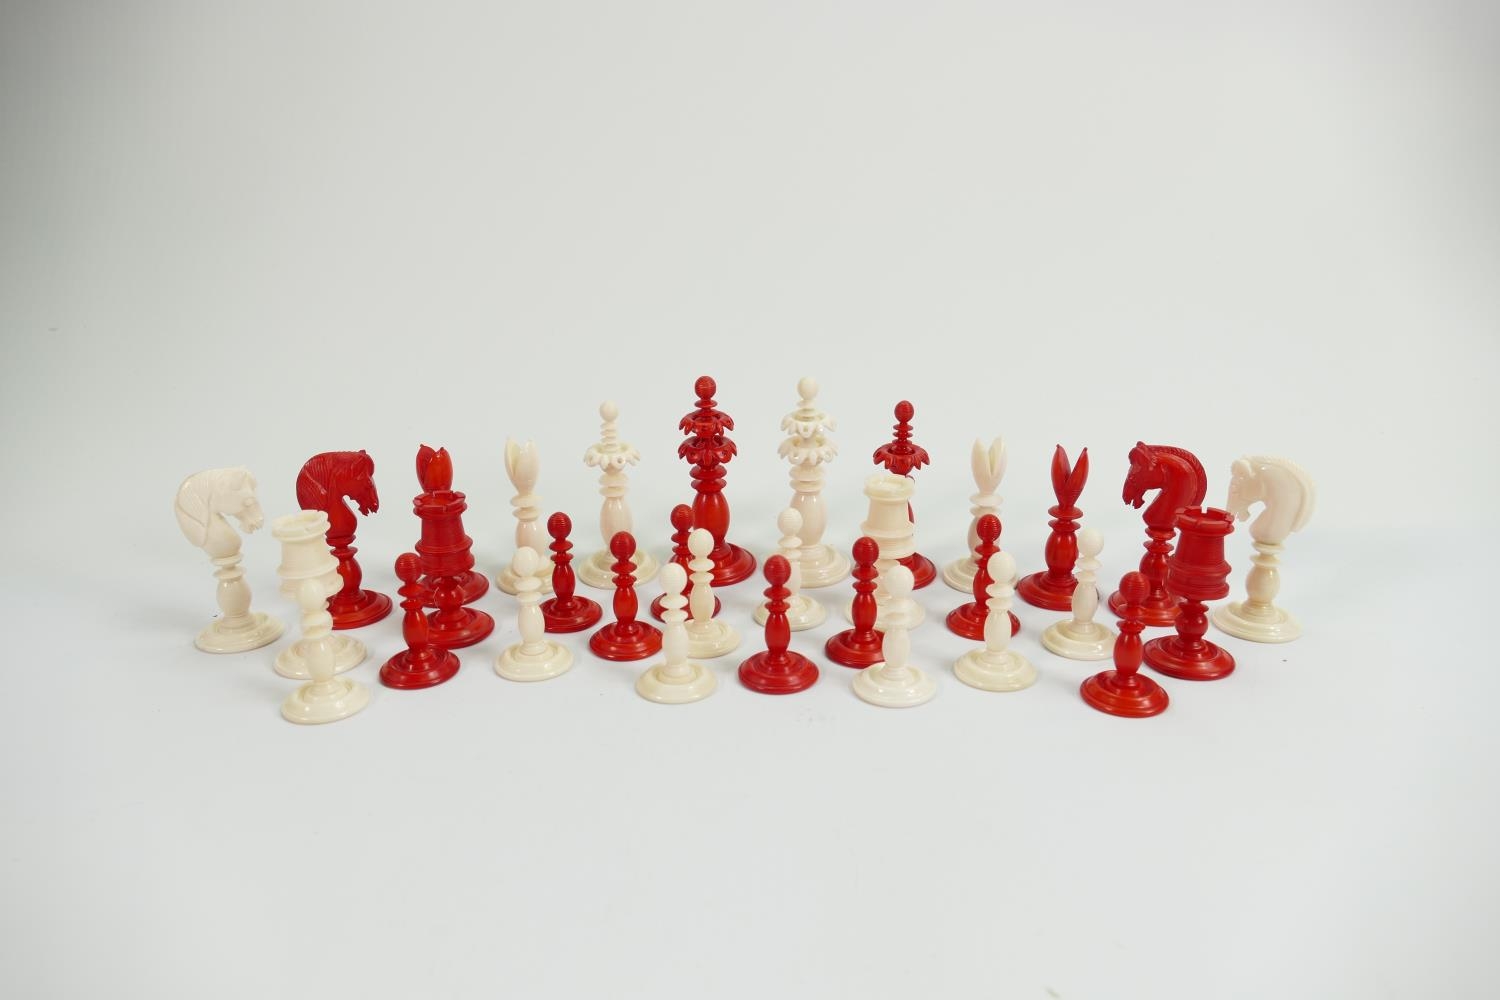 Quality Turned Resin Chess Set : height of king 7.6cm ref 240 - Image 4 of 4